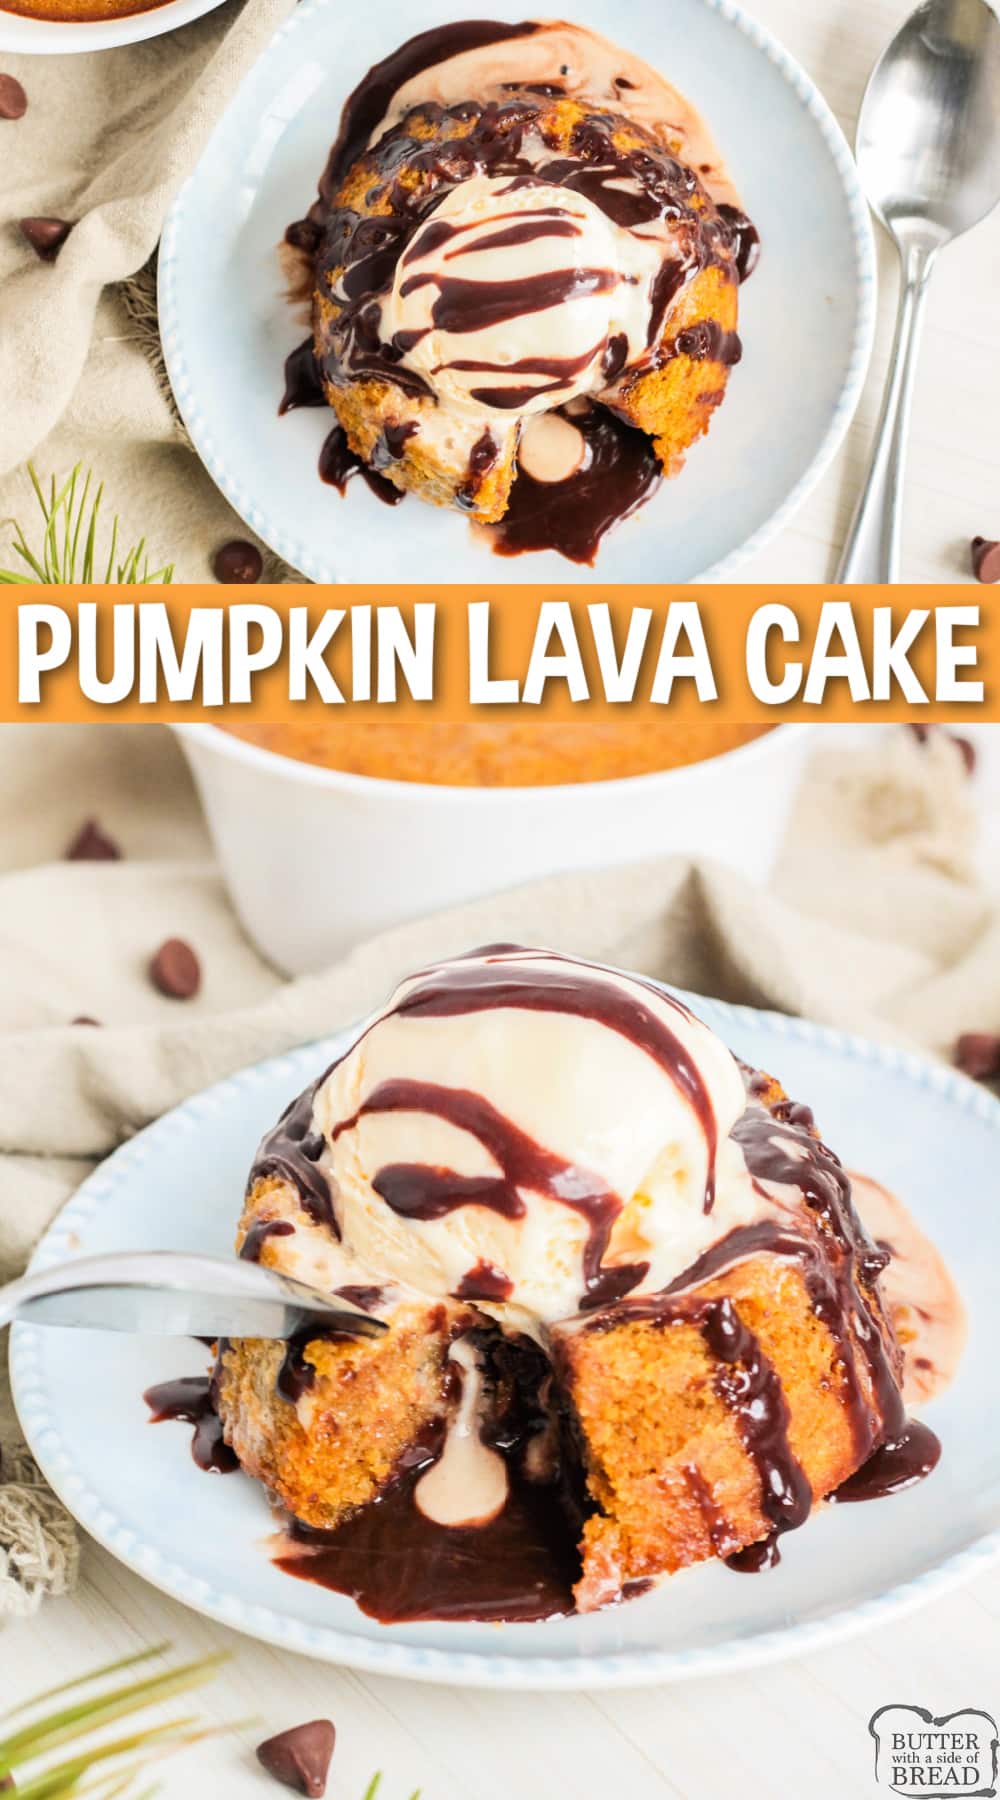 Pumpkin Lava Cake is a decadent pumpkin cake filled with a gooey chocolate ganache. Made completely from scratch, this pumpkin lava cake recipe is absolutely delicious!